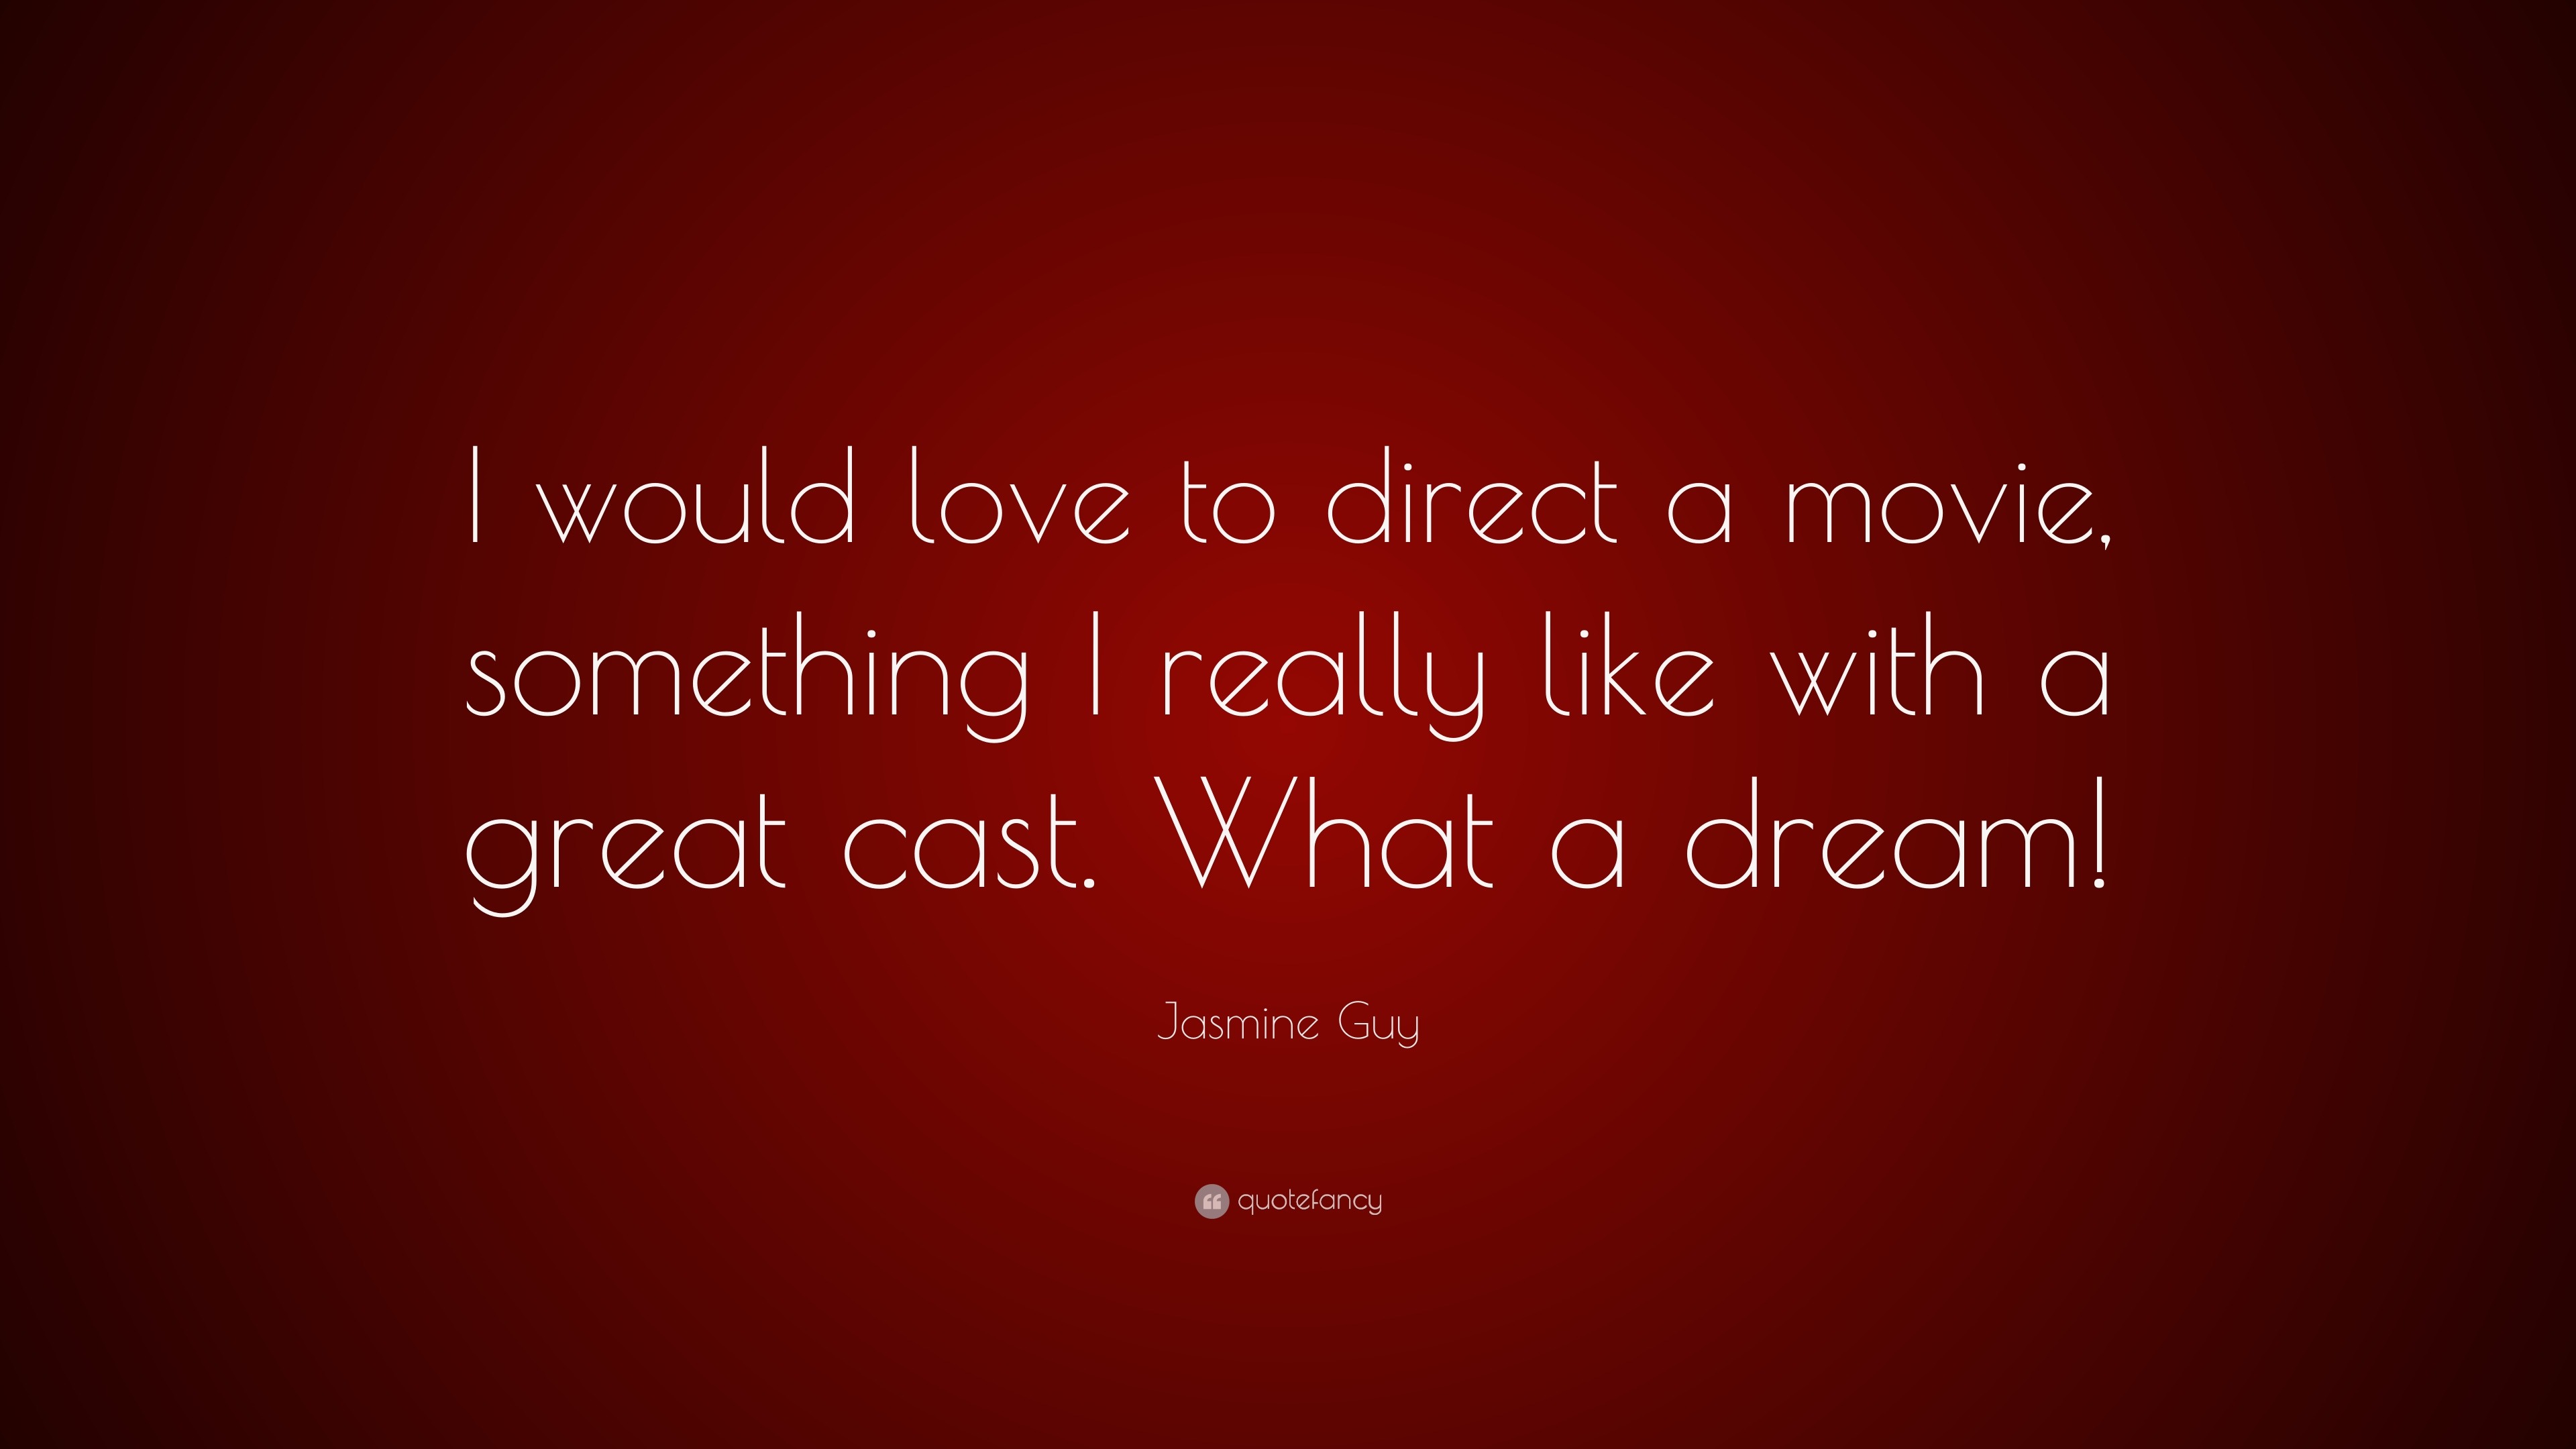 Jasmine Guy Quote “I would love to direct a movie something I really